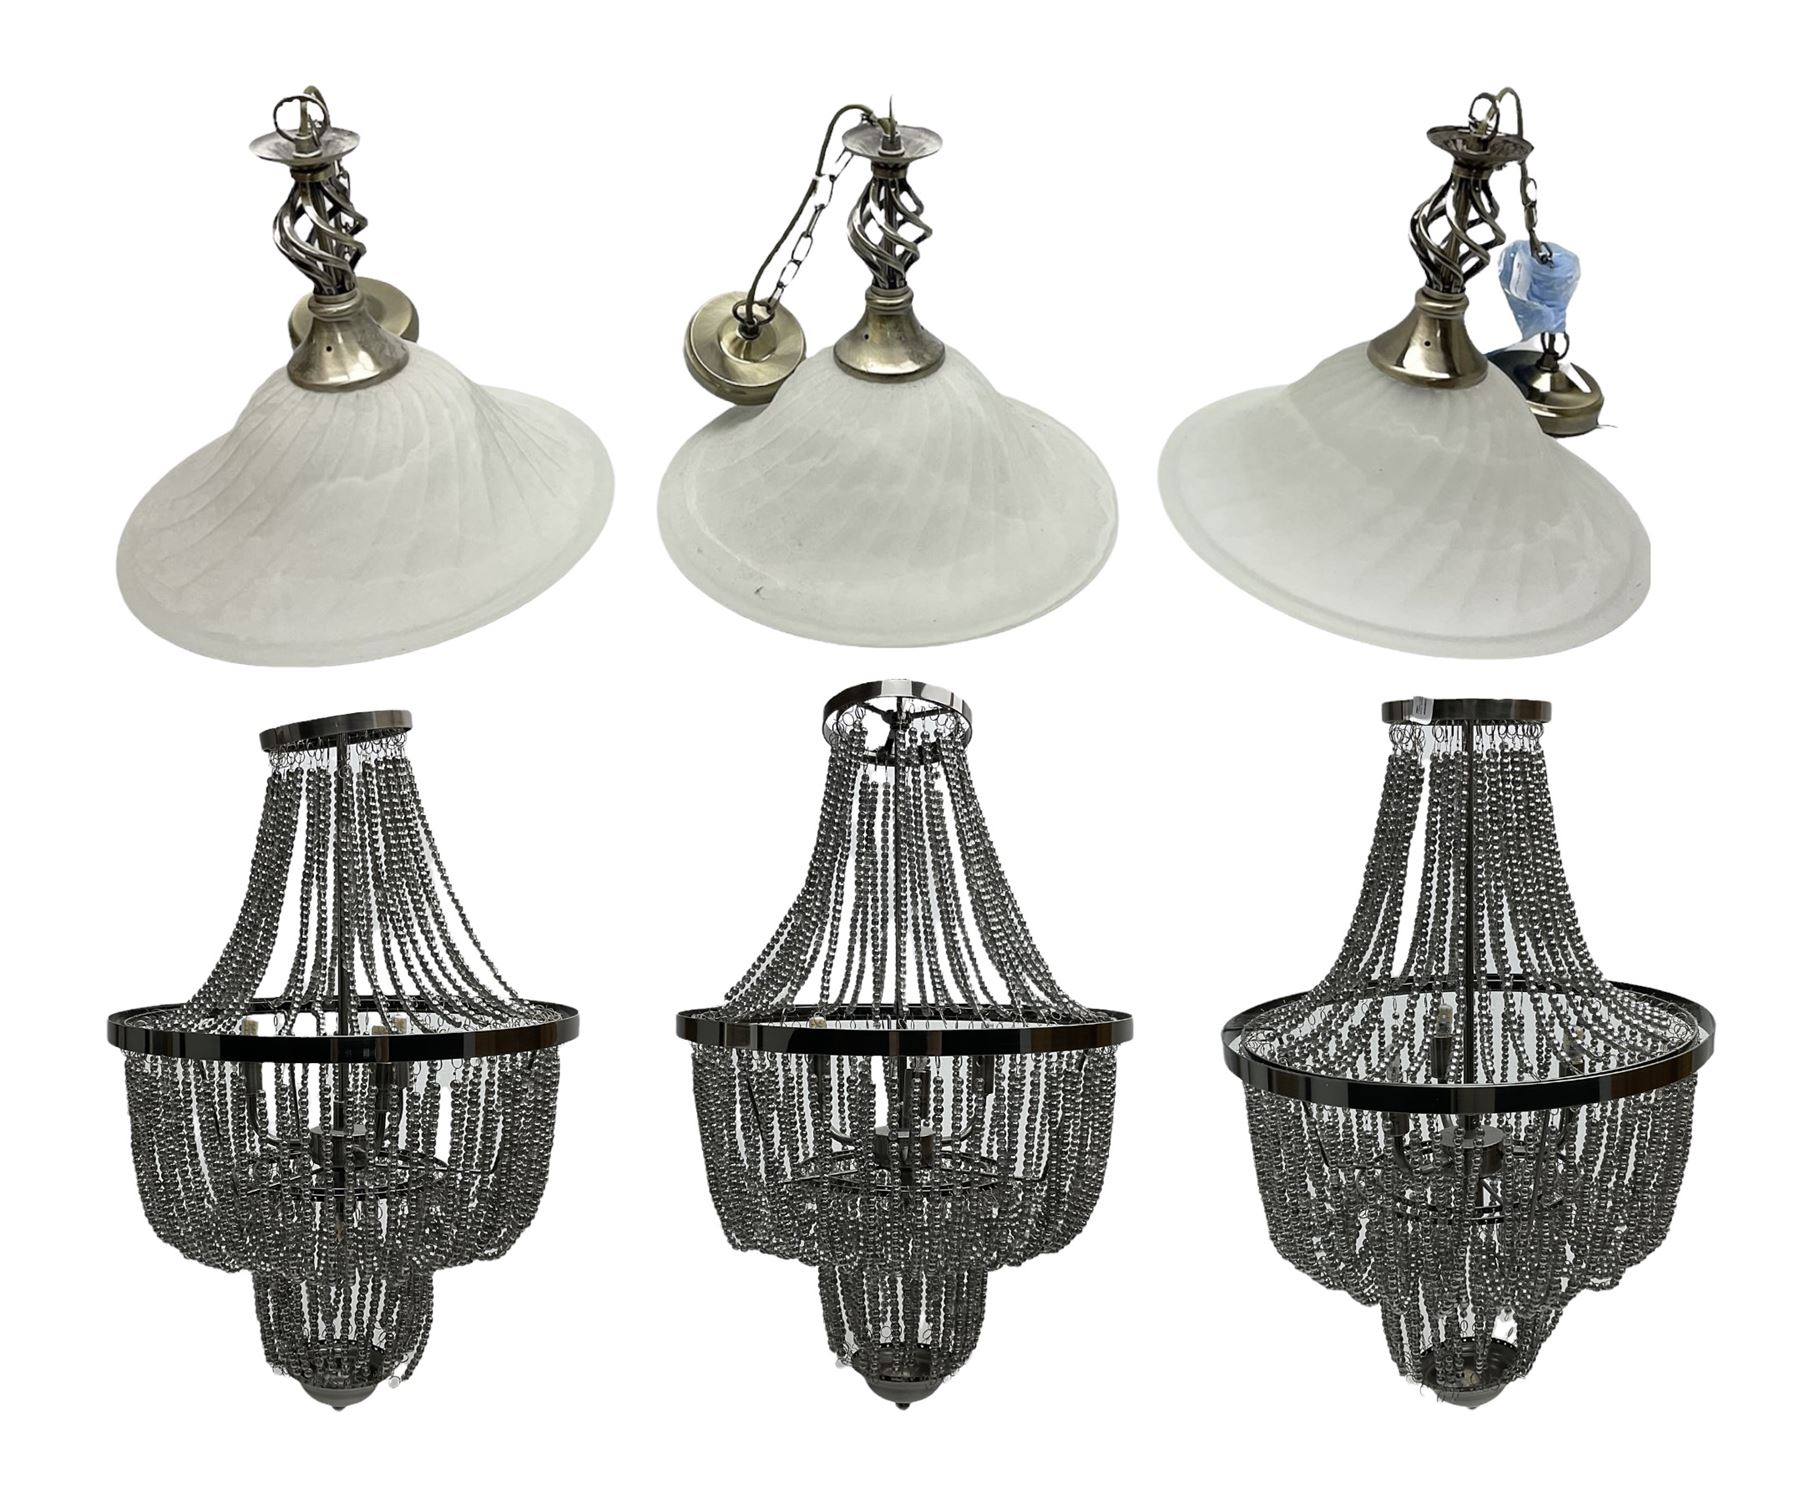 Three contemporary metal beaded chandeliers retailed by Next